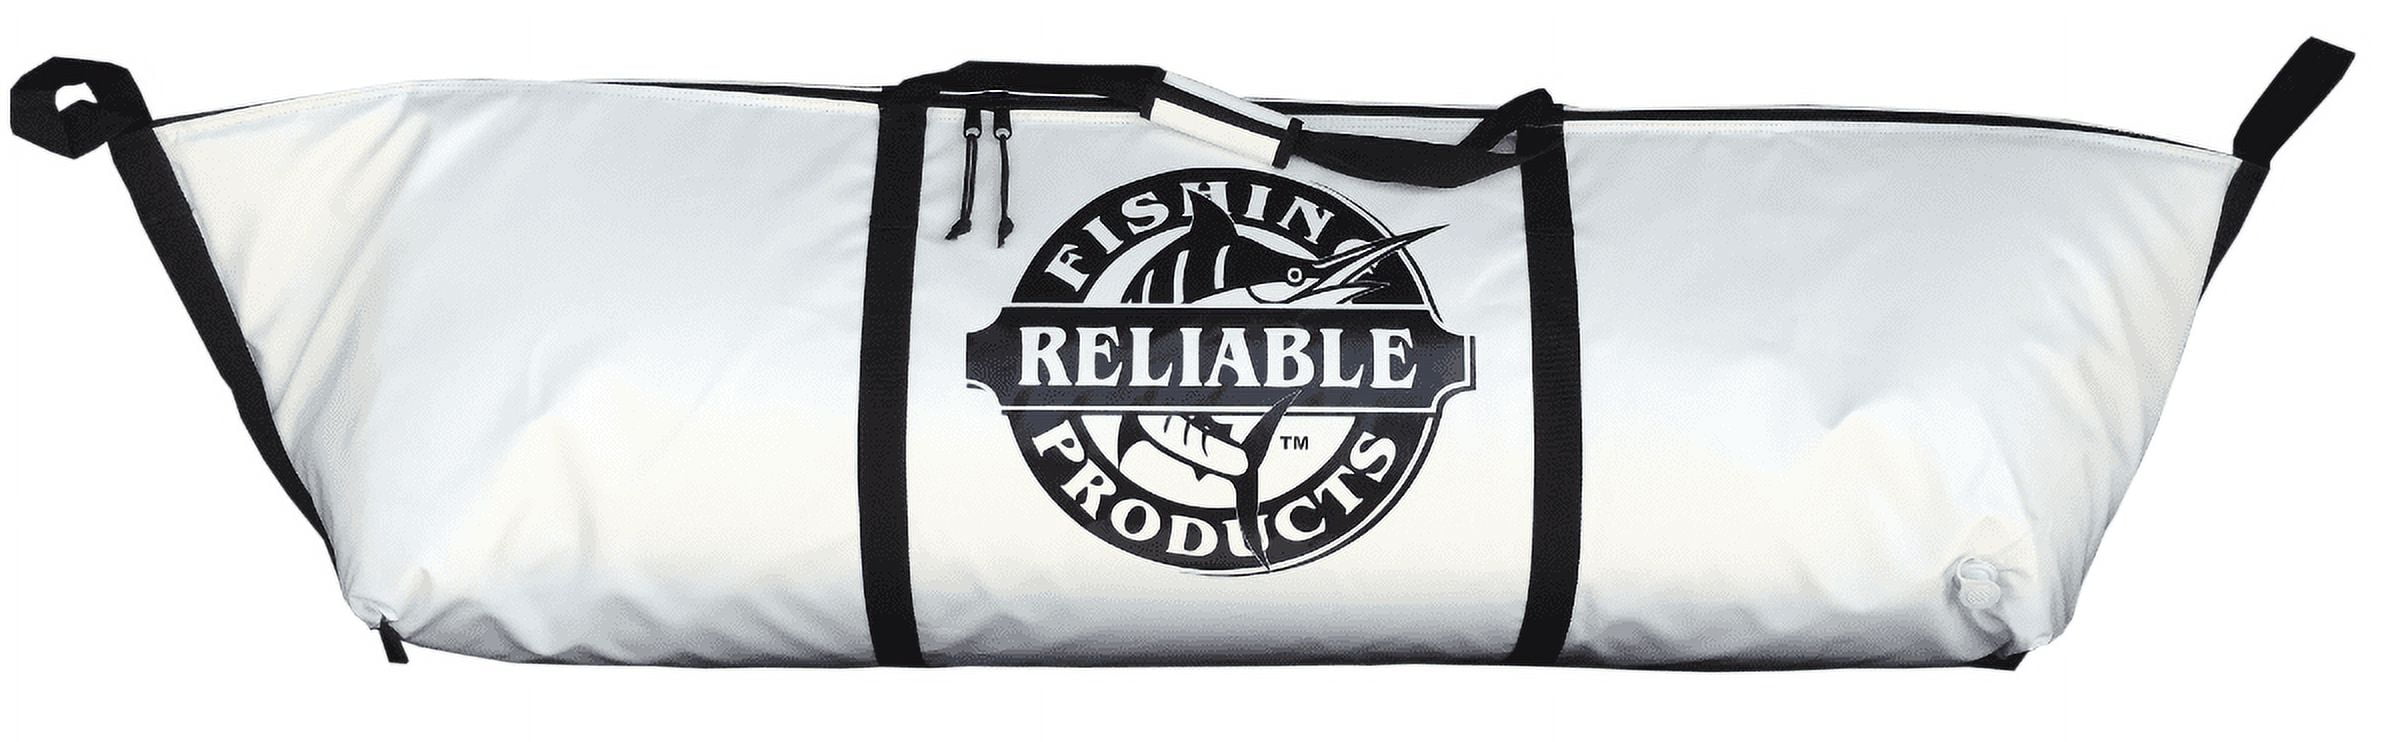 Reliable Fishing Products 20 Inch Tall by 36 Inch Insulated Kayak Cooler 